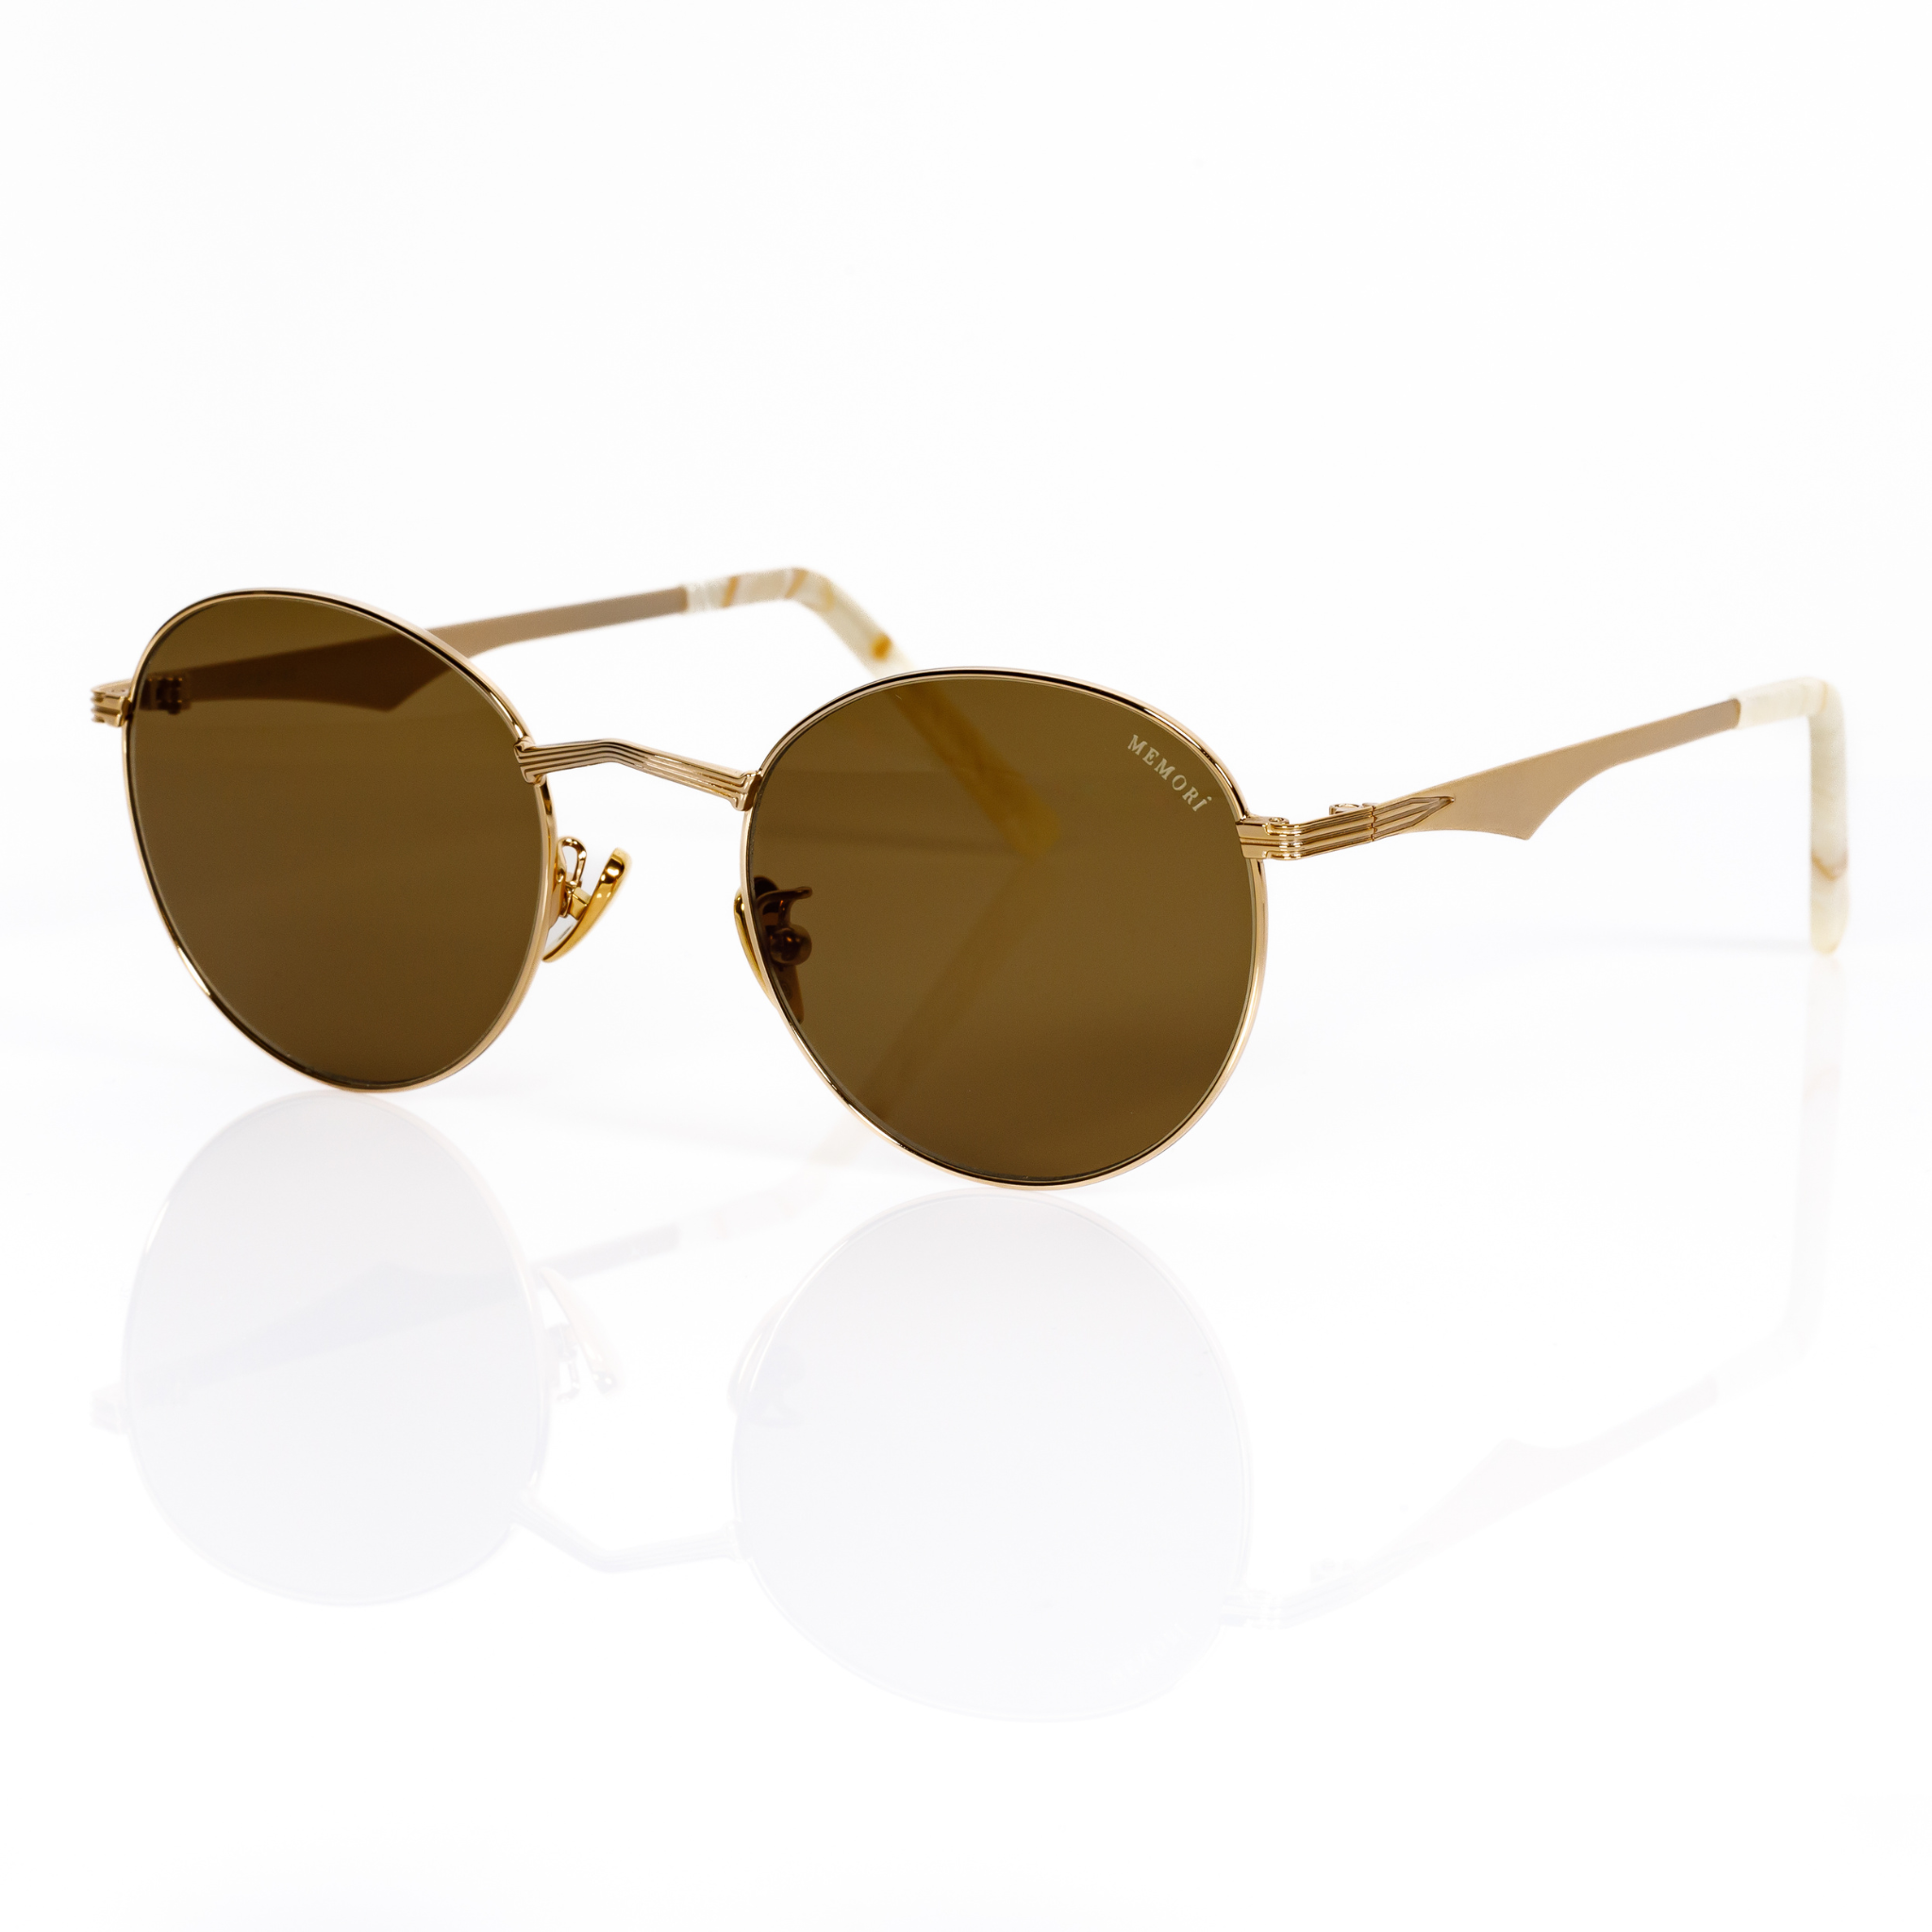 Memorí sunglasses are the best sunglasses for small faces, as every pair is designed with a narrow fit. This photo shows the Rounc sunglasses in gold with warm brown lenses, and showcases the angular nose bridge and scalloped temple arms. 